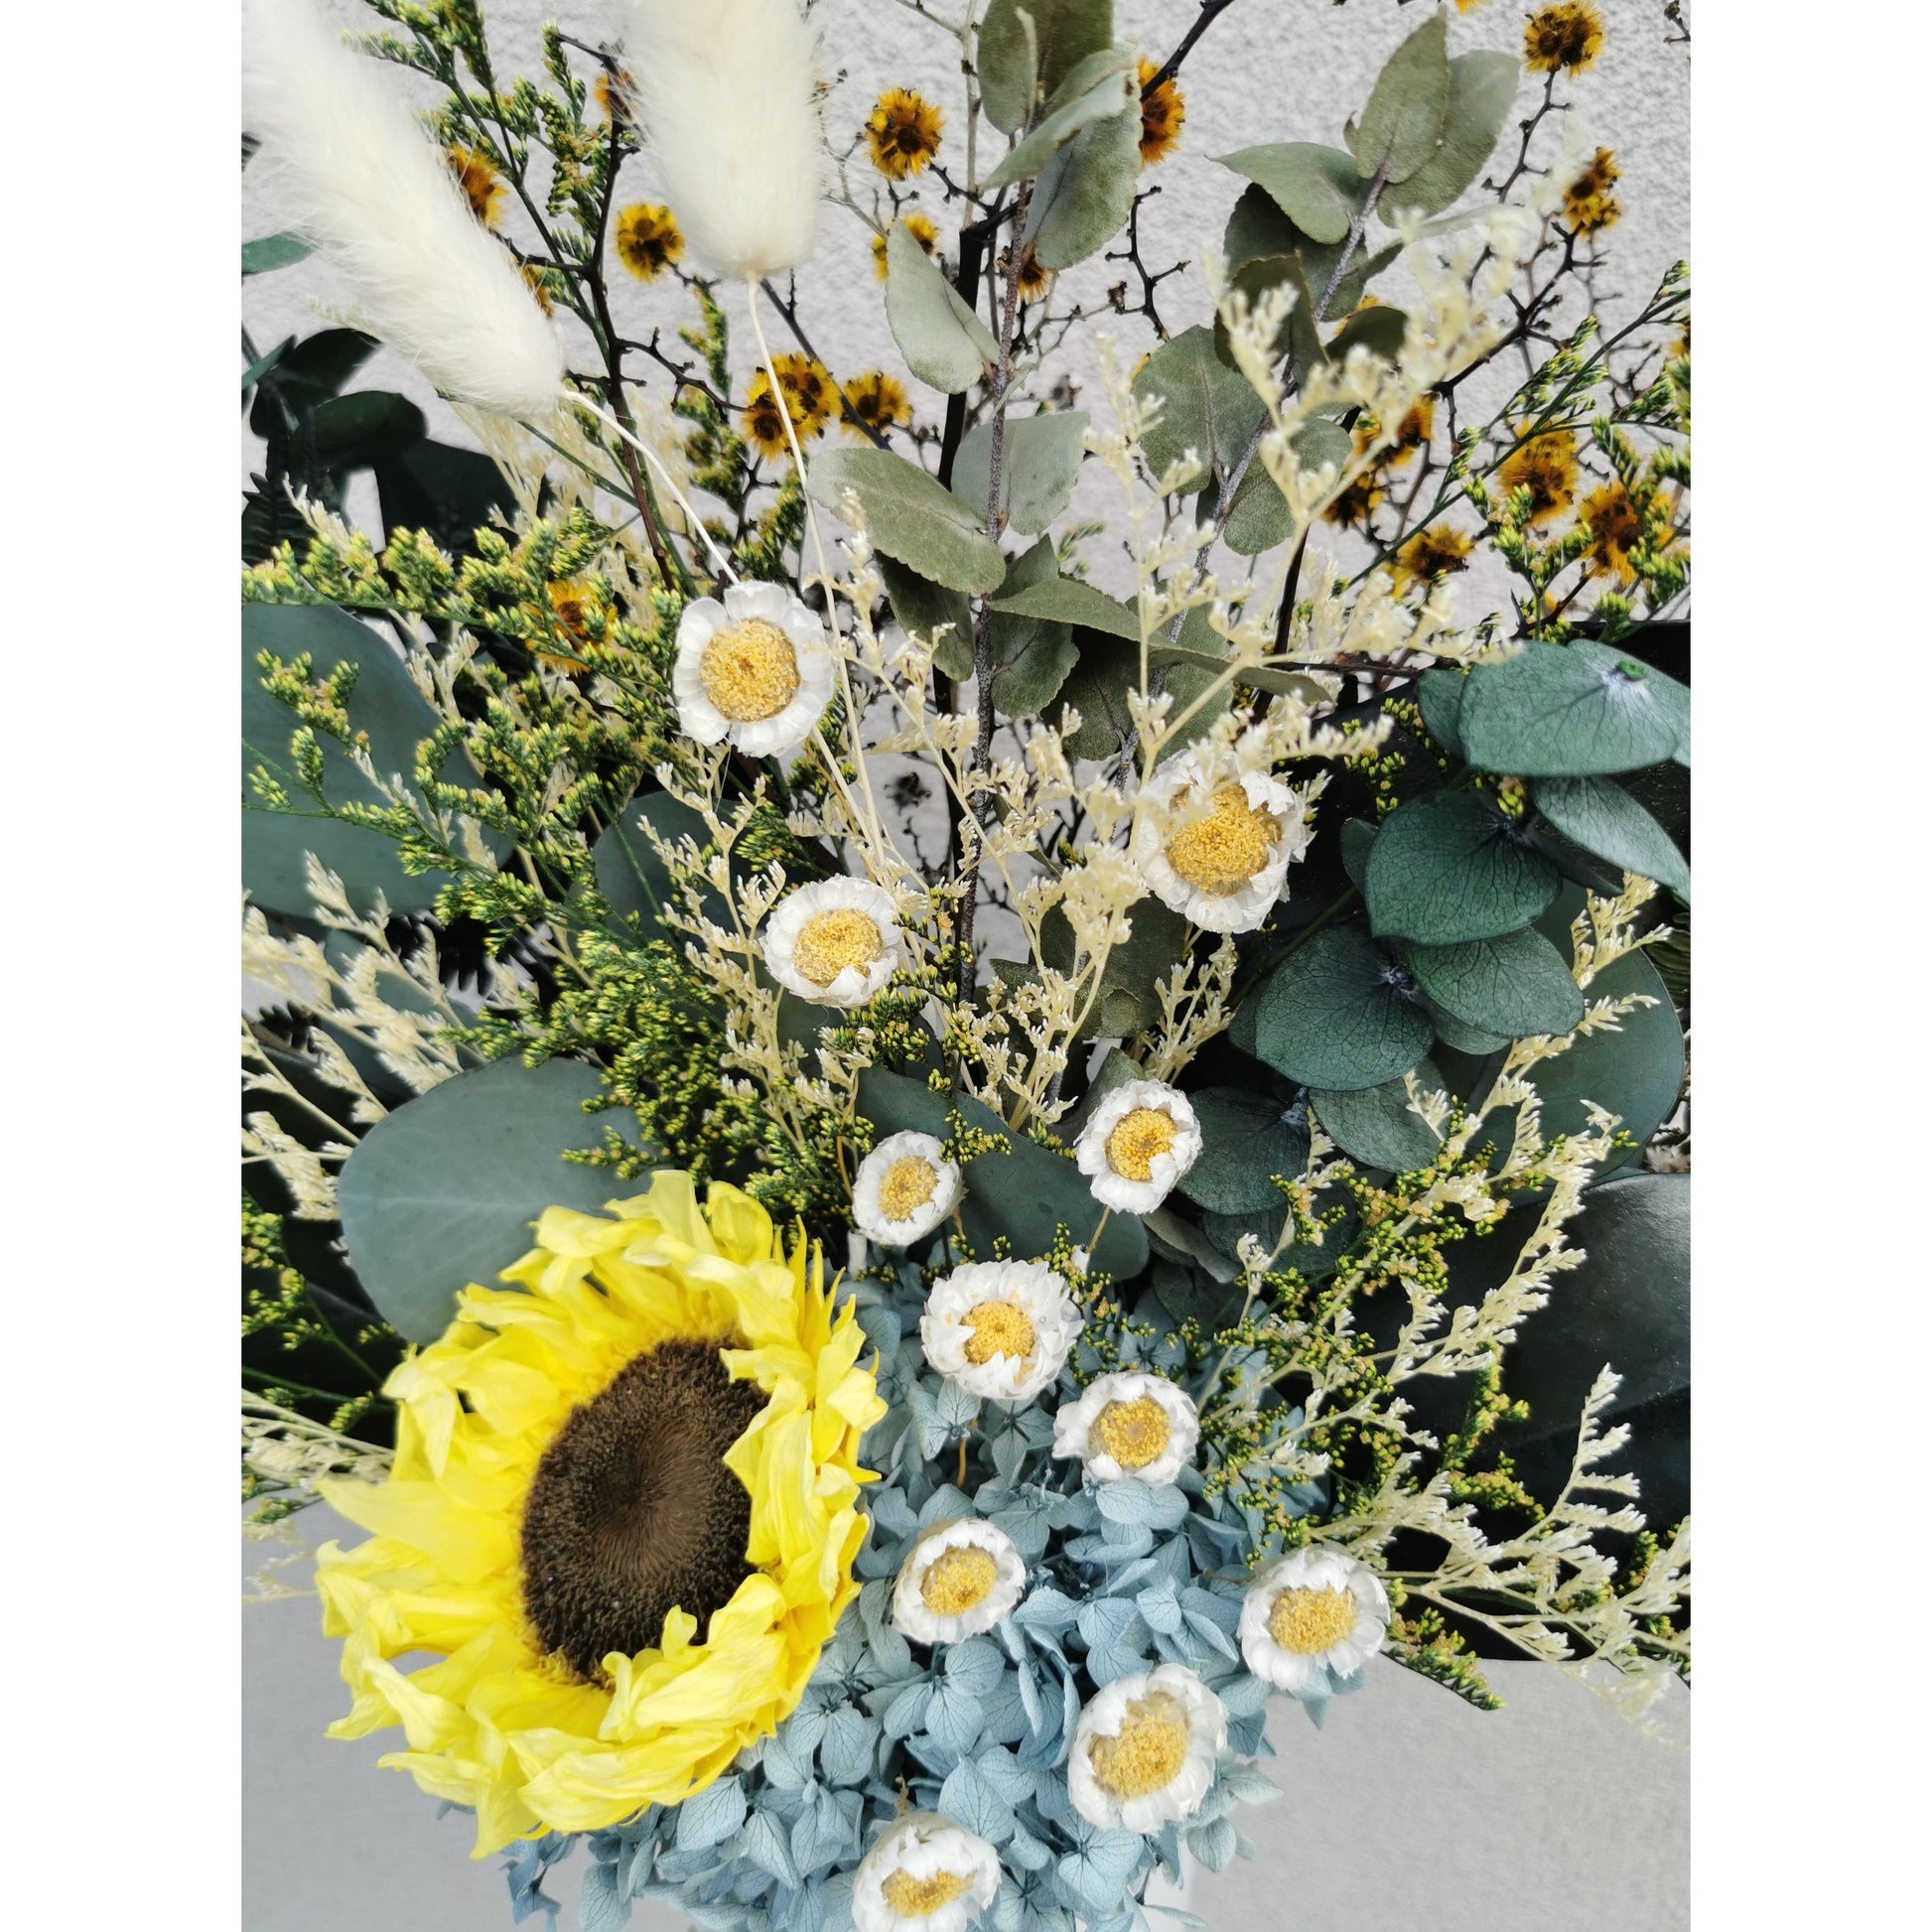 Dried & Preserved flower arrangement featuring a preserved yellow sunflower and yellow daisies and lush greenery and set in to a white pot. Photo shows a birds eye view of the flowers and the daisies cascading down the arrangement